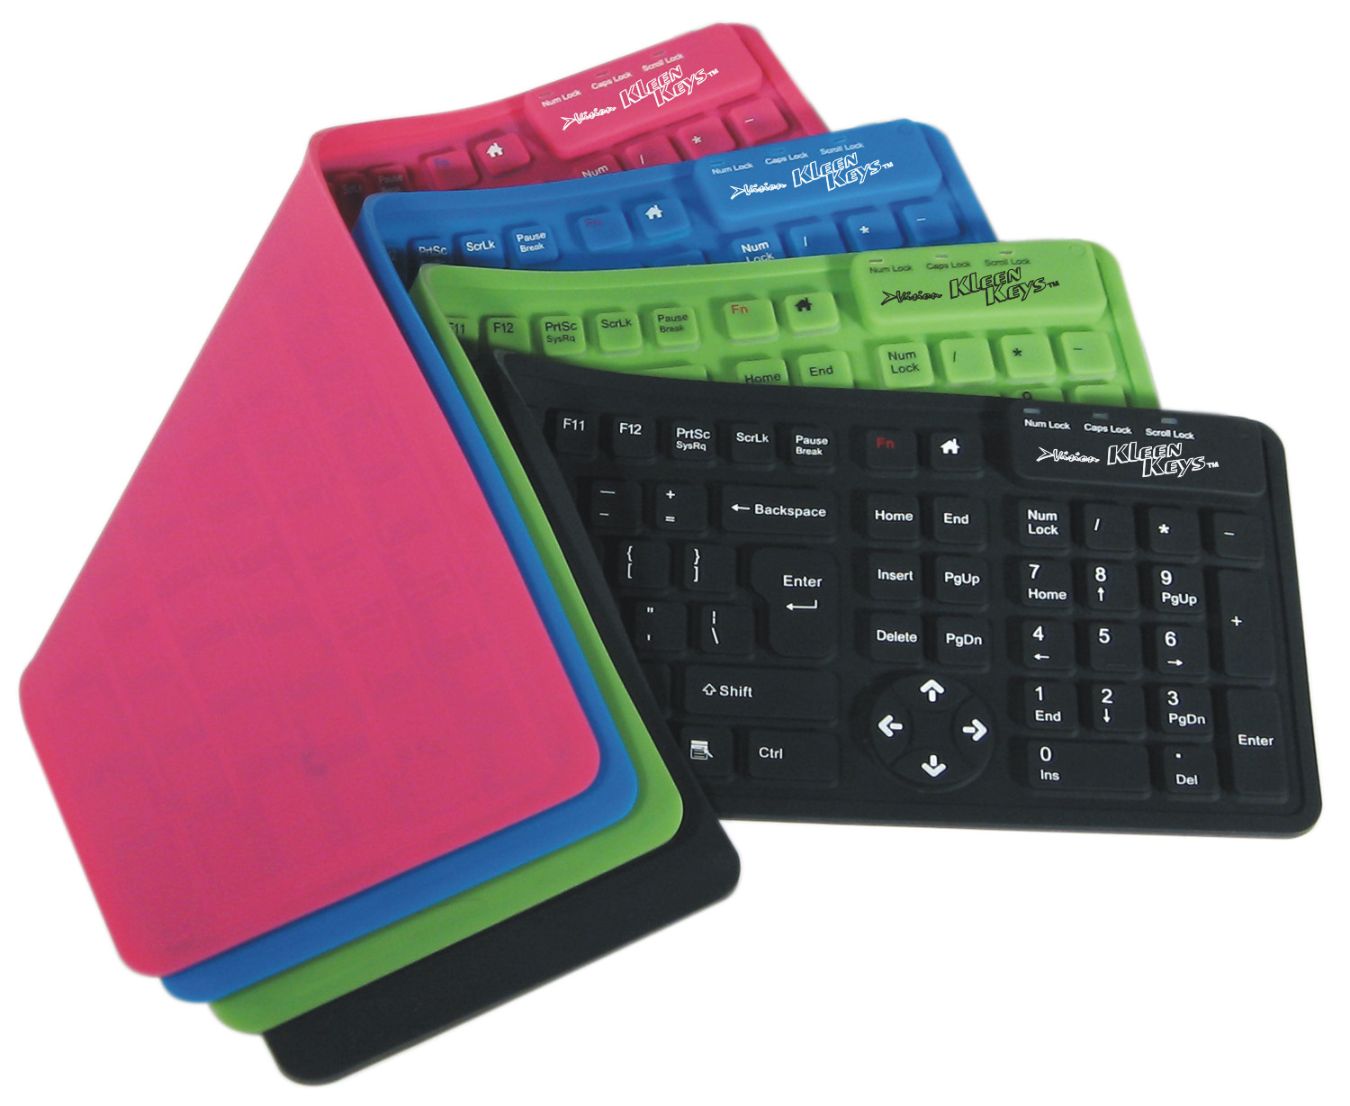 Holiday Gift Guide 2013: 5 Stocking Stuffers for the Tech Lover